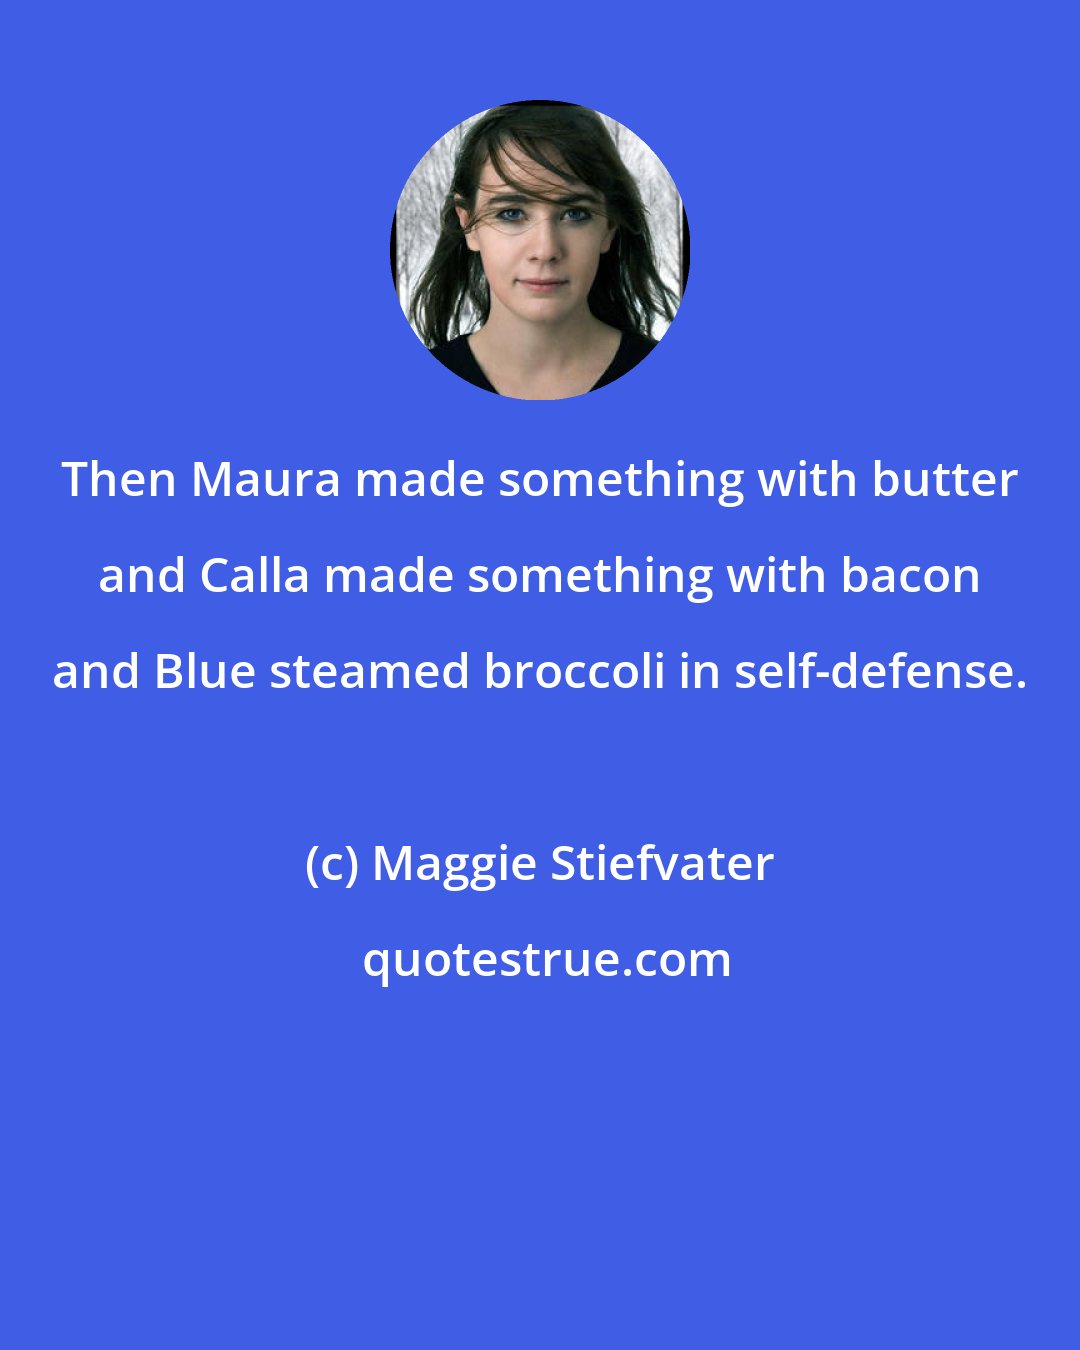 Maggie Stiefvater: Then Maura made something with butter and Calla made something with bacon and Blue steamed broccoli in self-defense.